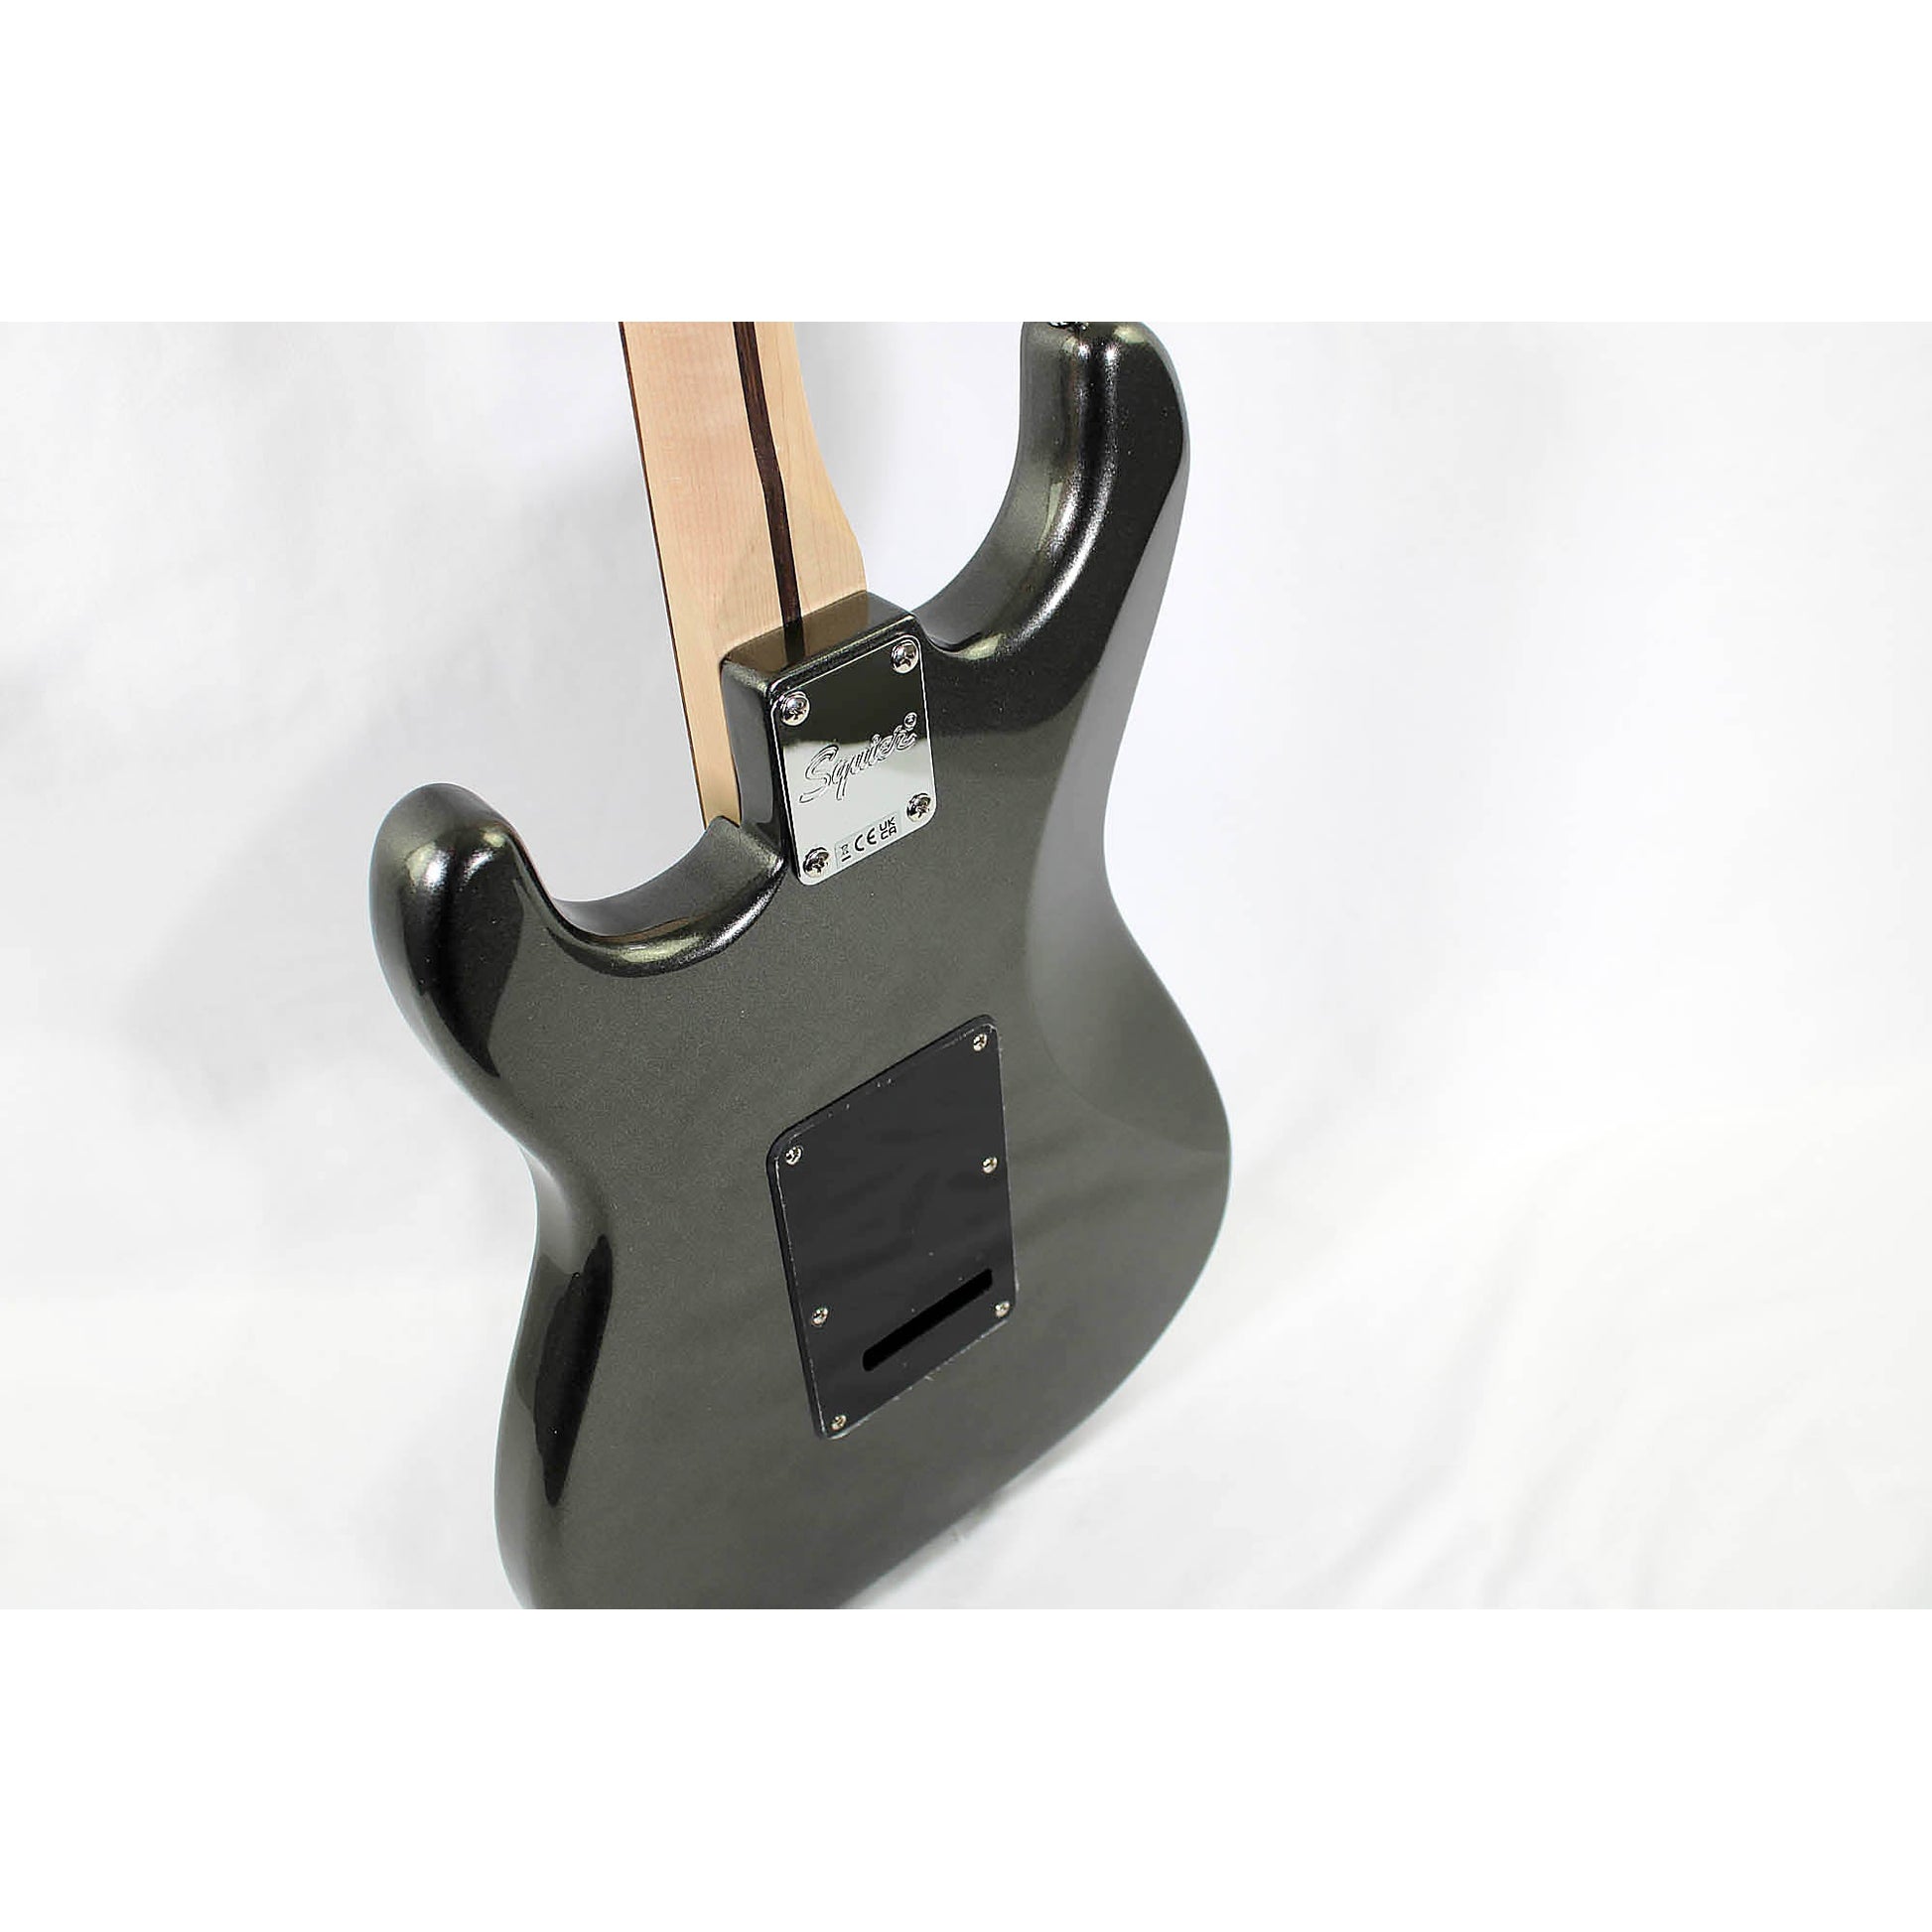 Squier Affinity Series Stratocaster - Charcoal Frost Metallic - Leitz Music-885978723409-0378051569